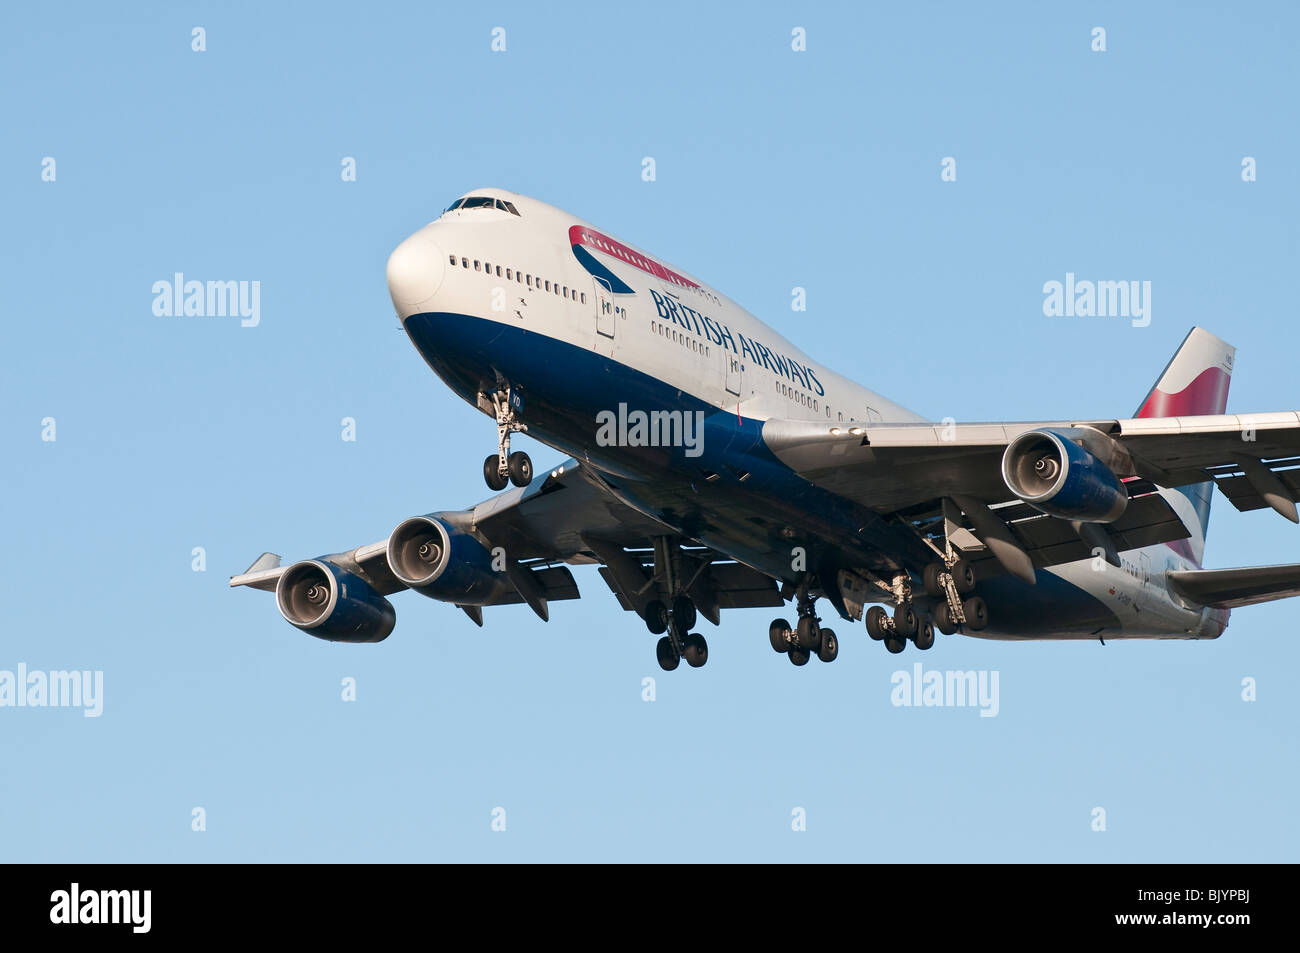 British Airways Boeing 747-400 on final approach for landing. Stock Photo